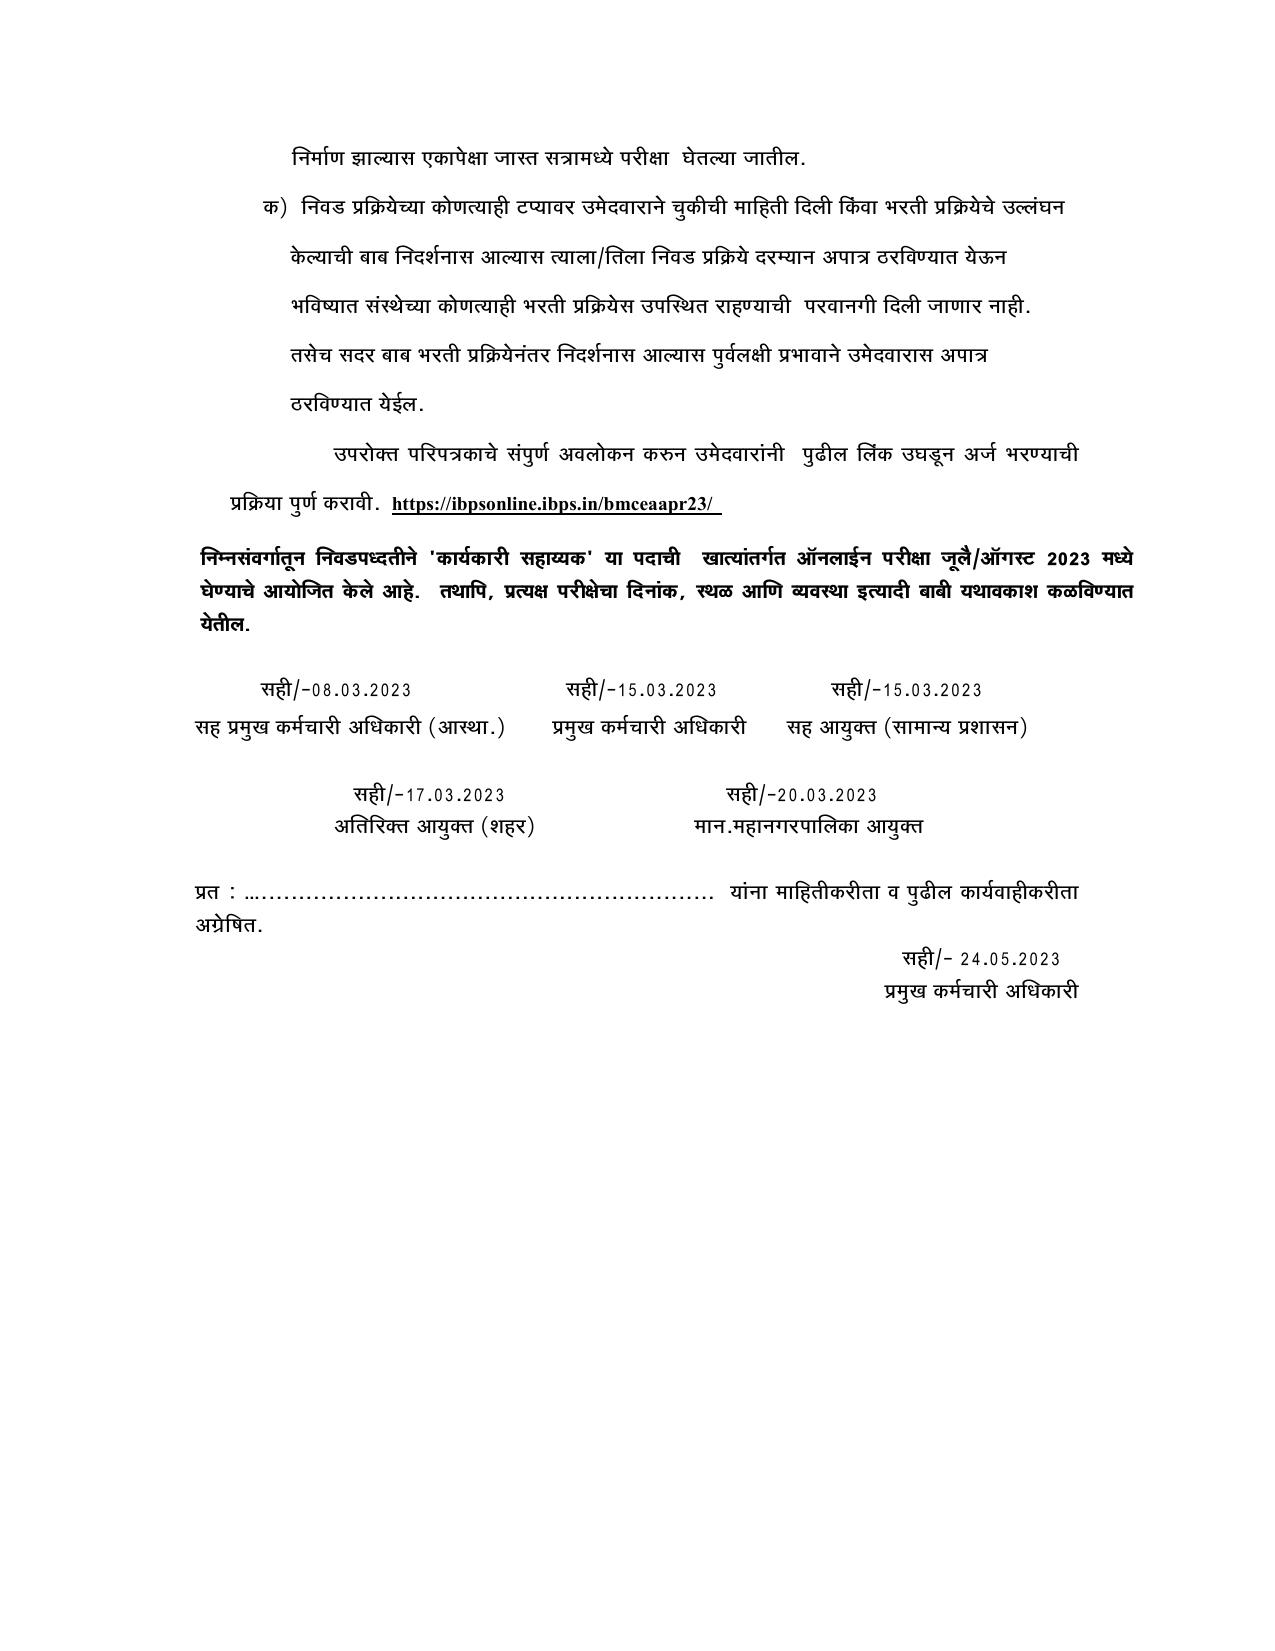 MCGM Executive Assistant Recruitment 2023 - Page 7